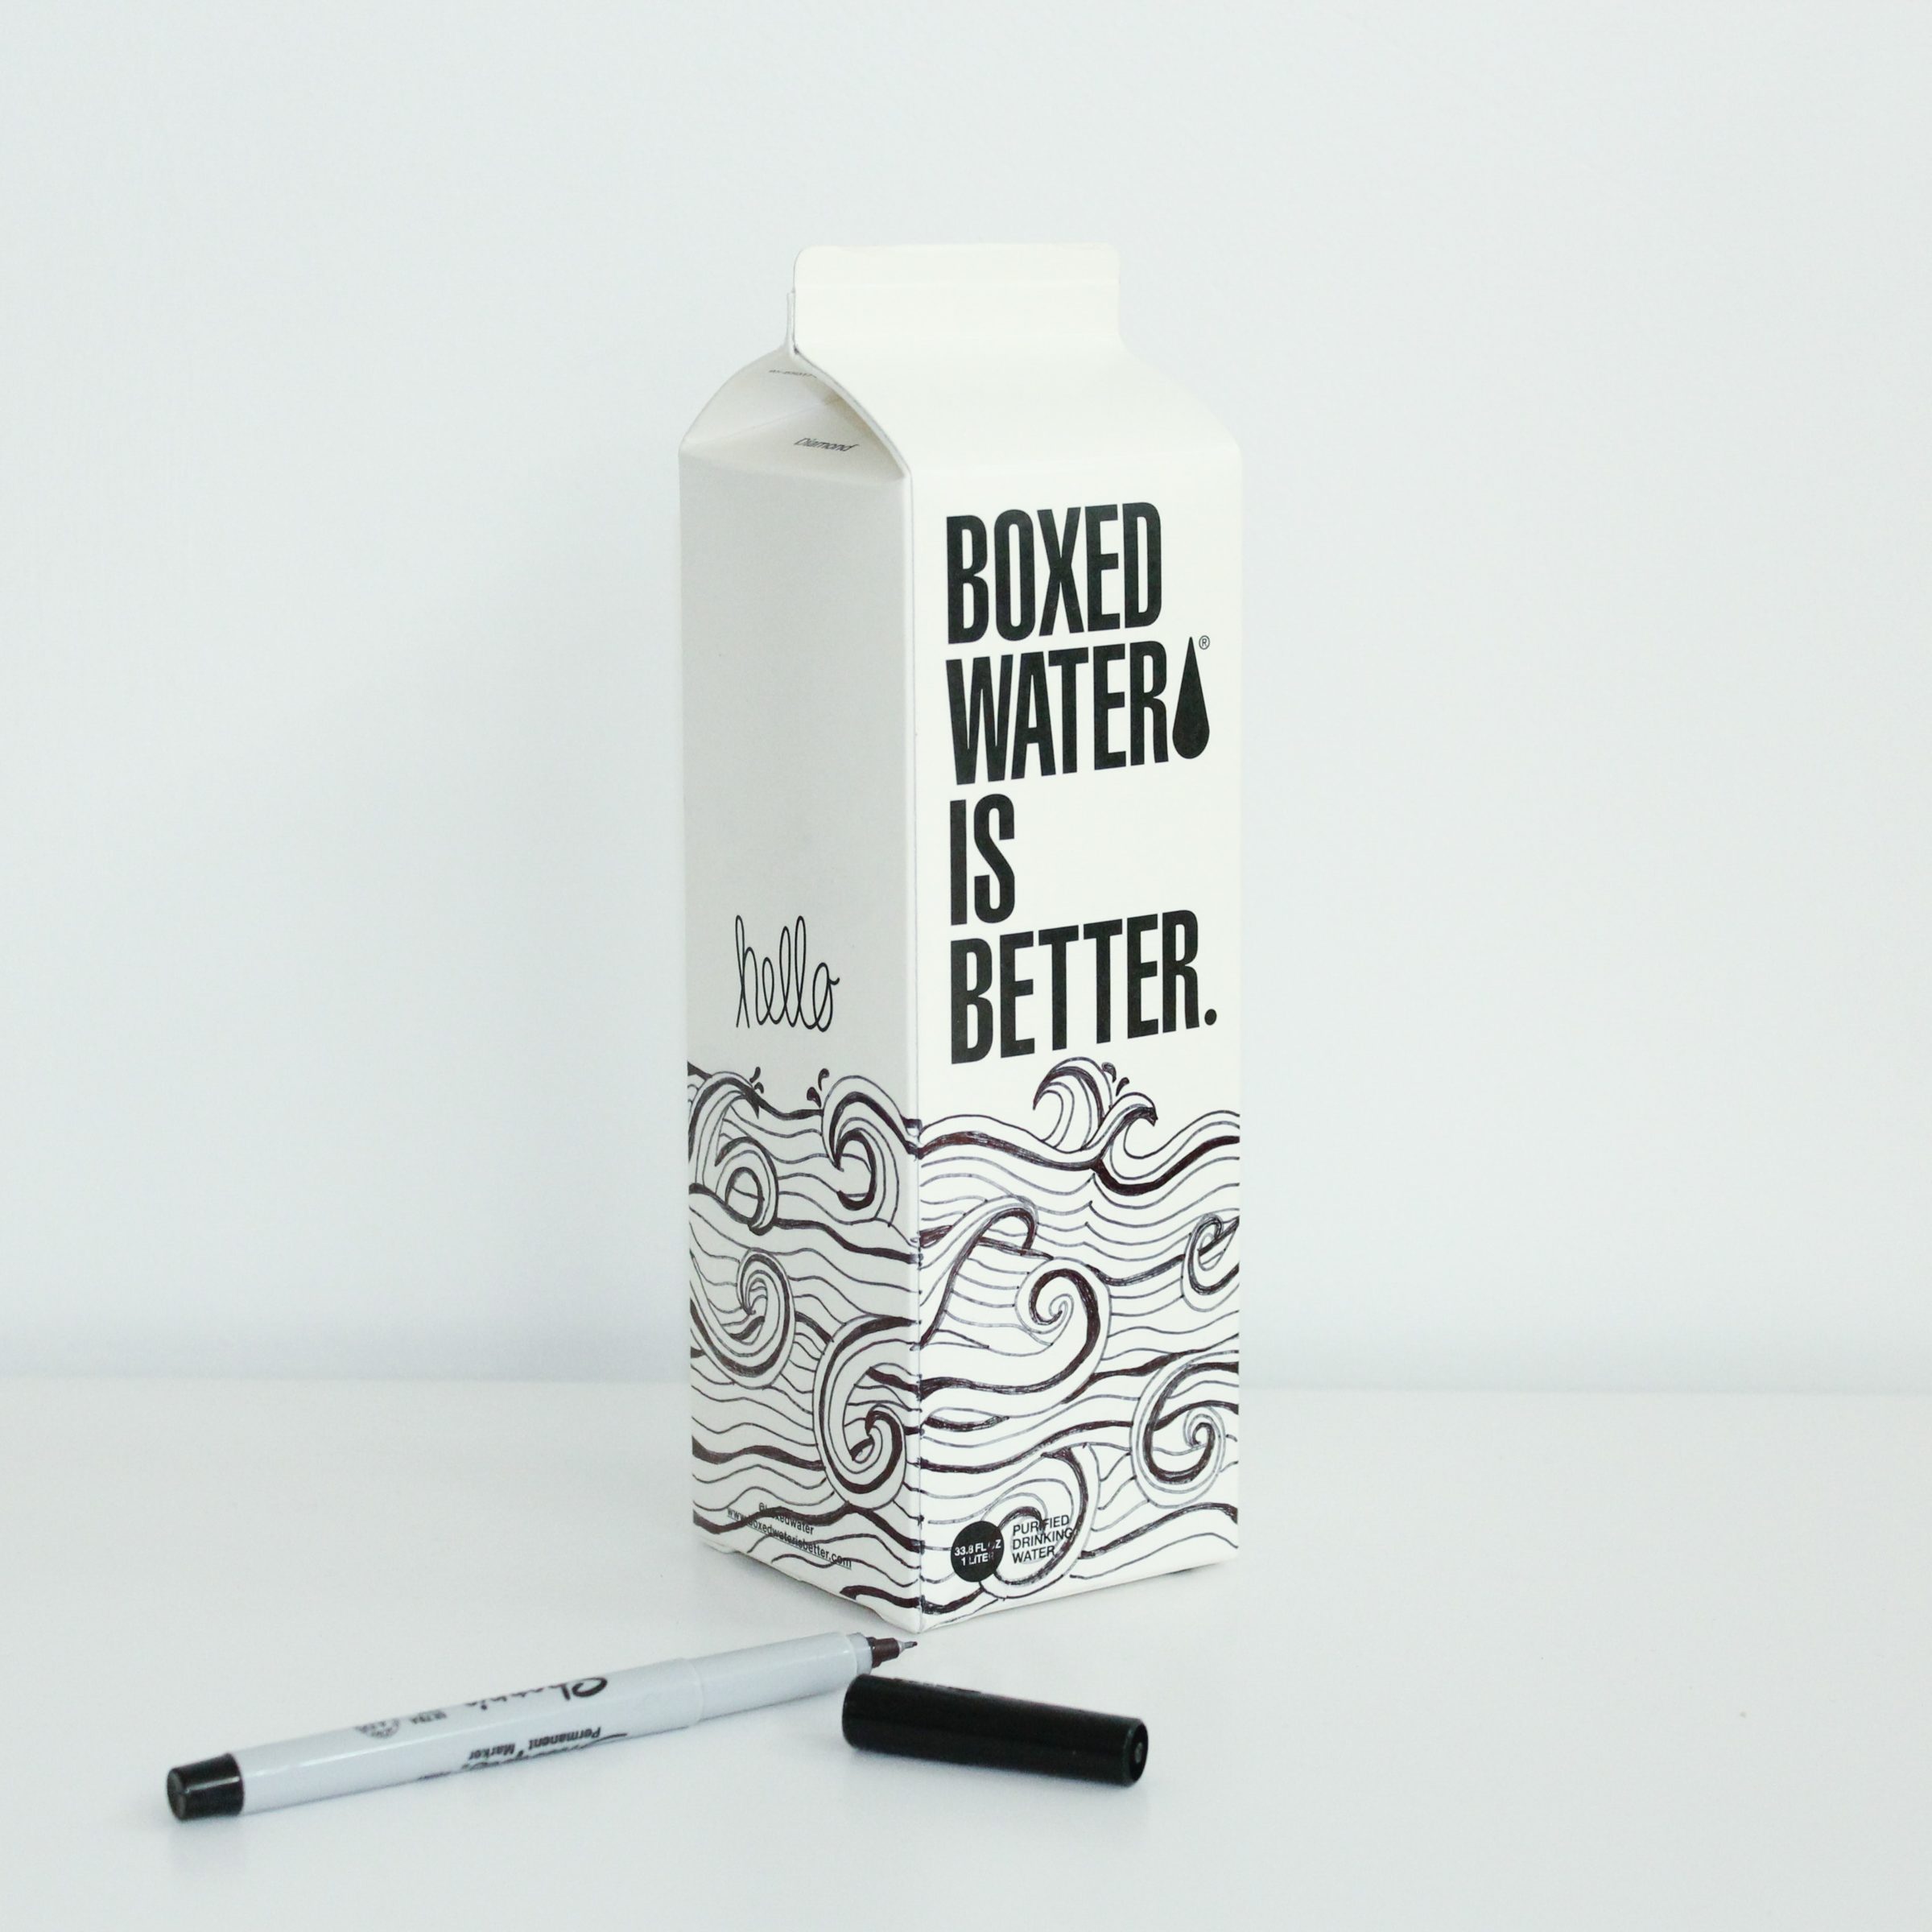 boxed water is better 7mr6Yx 8WLc unsplash